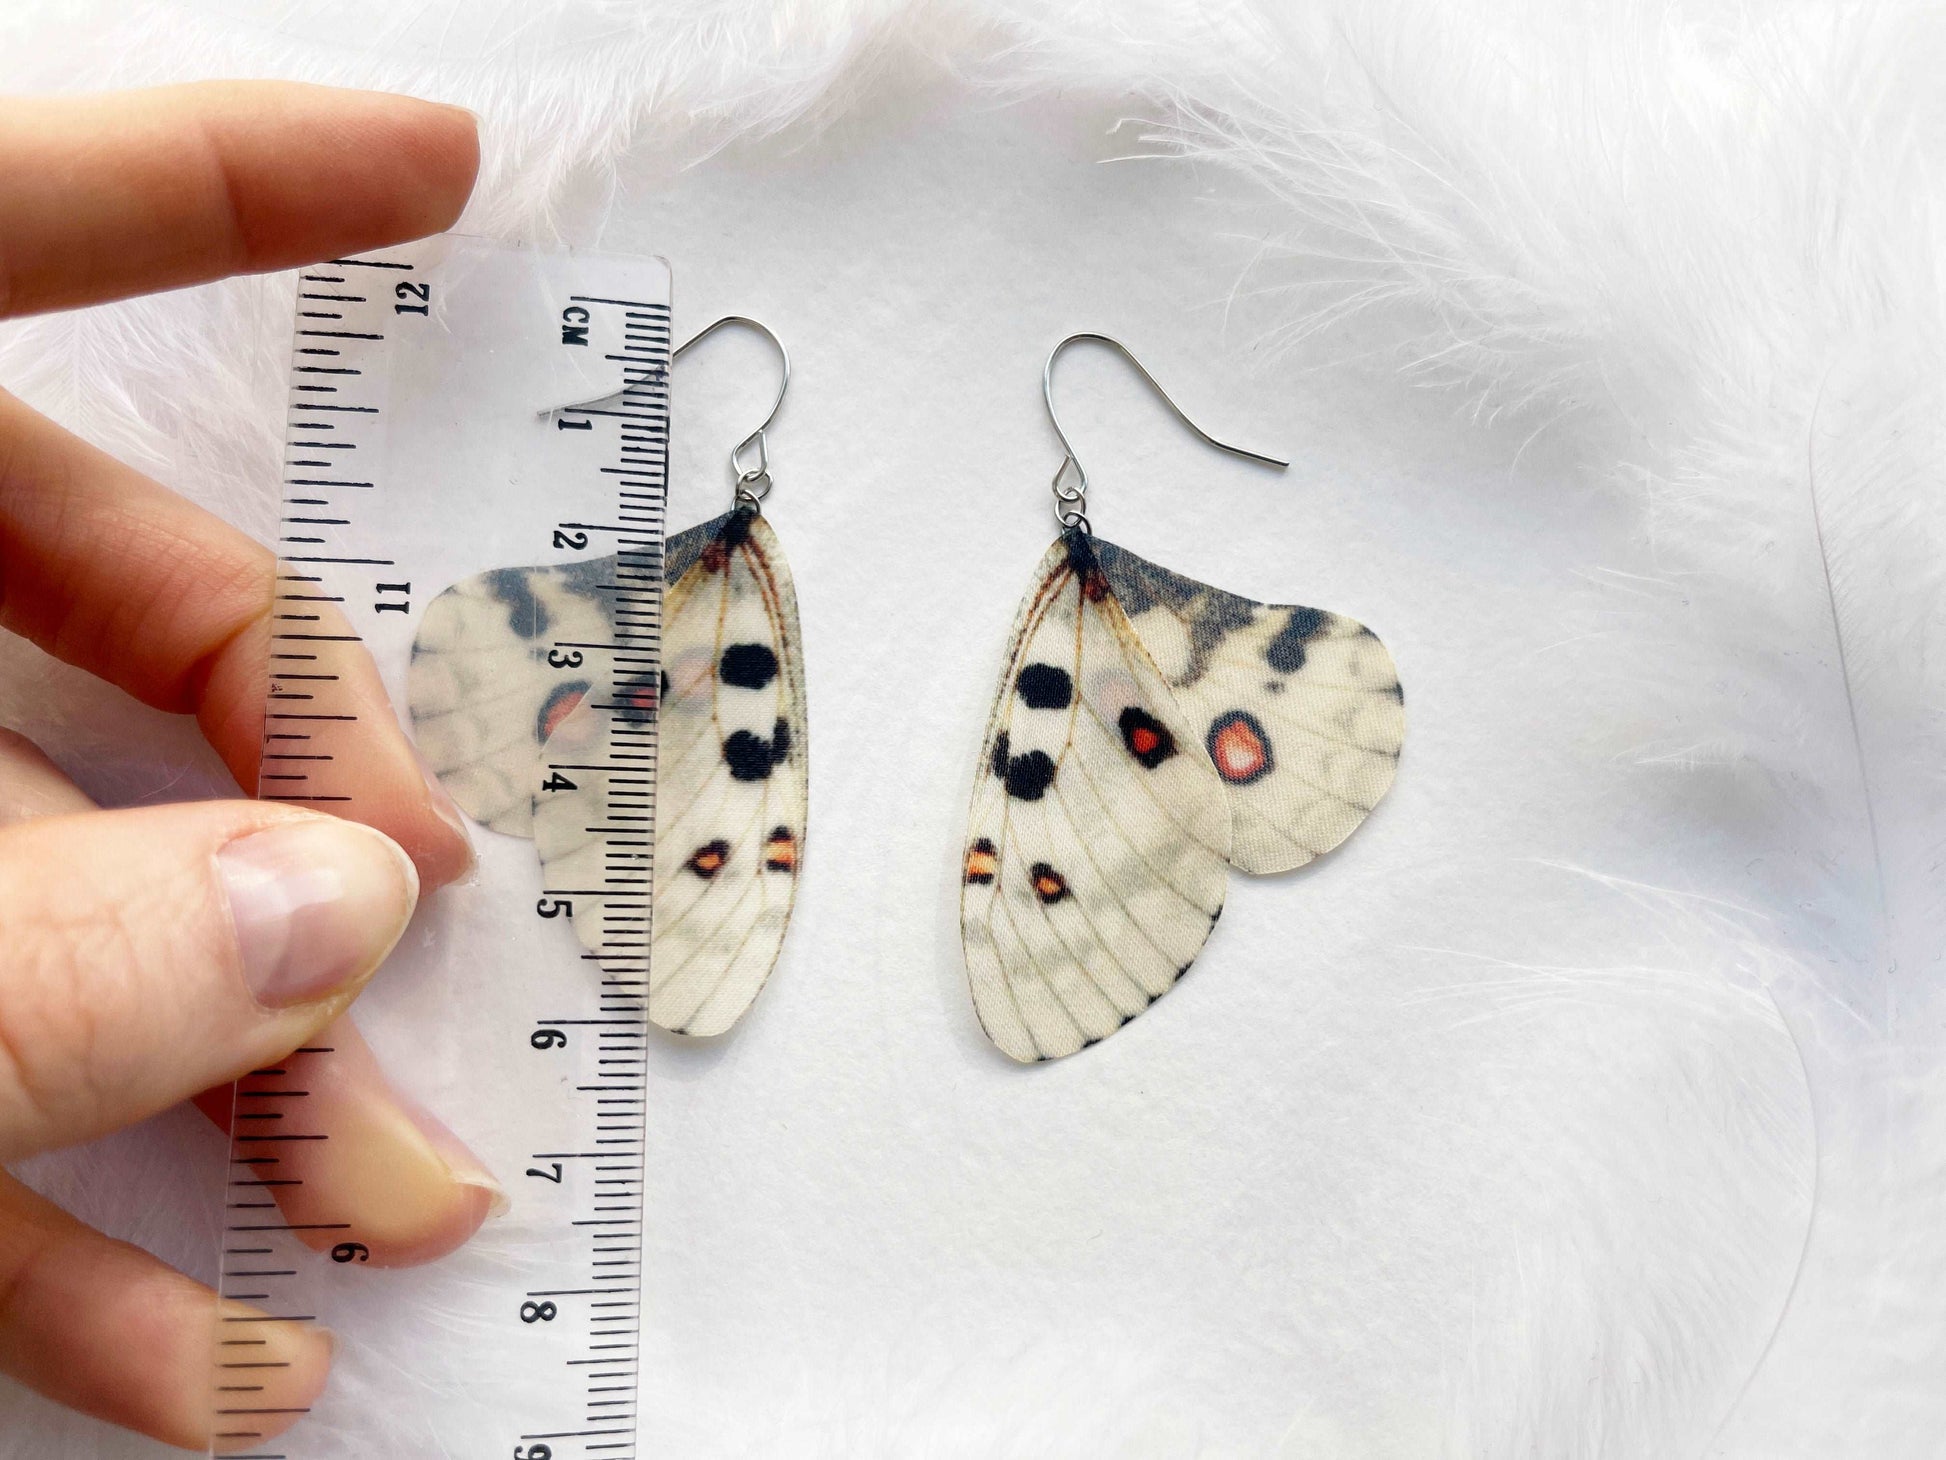 Cool bug earrings with butterfly wings